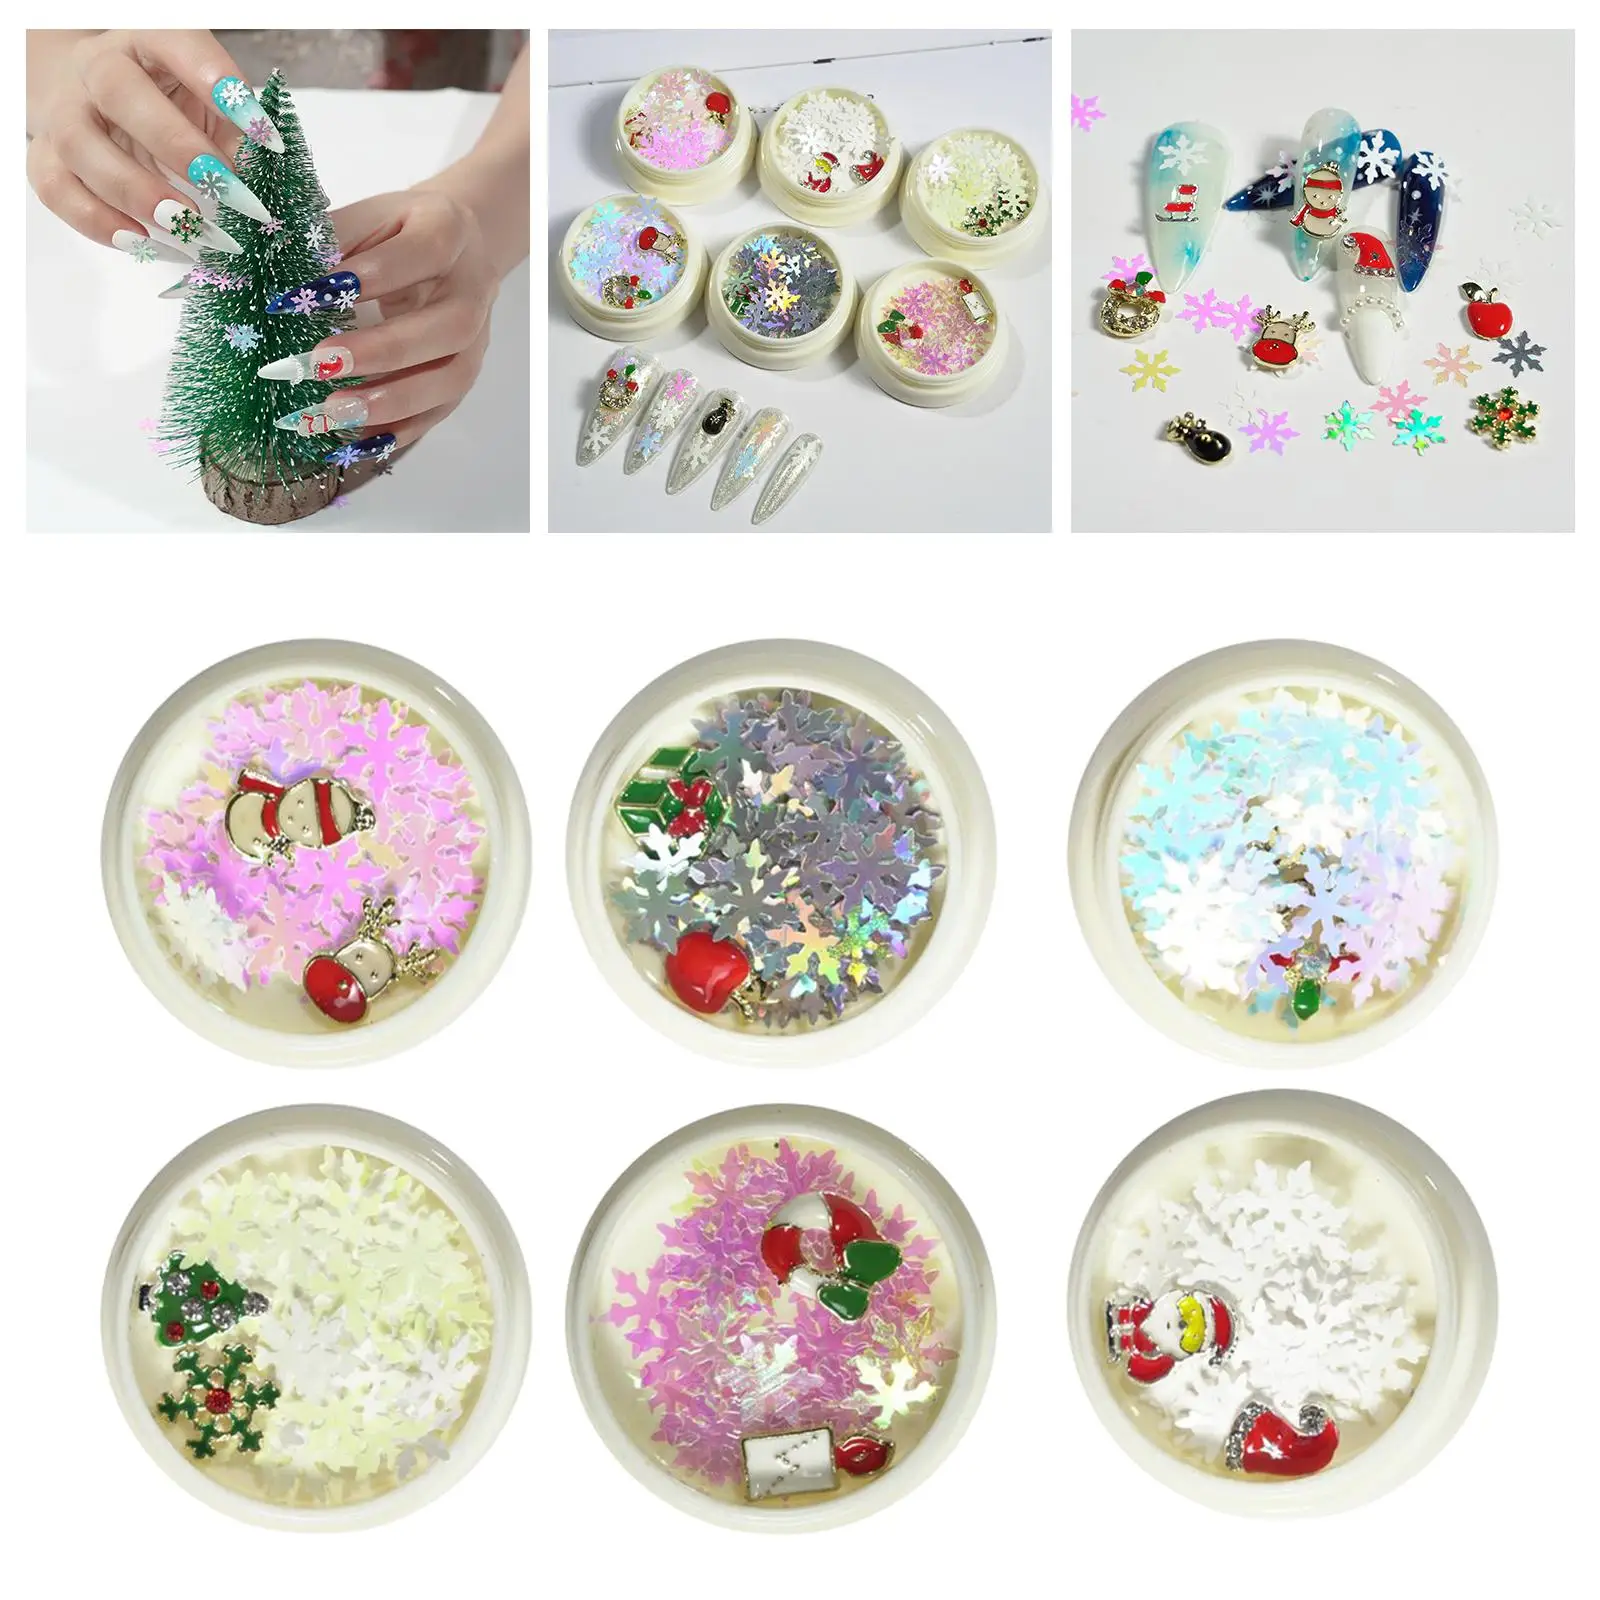 6 Colors Christmas Nail Art Glitters, Manicure Tips DIY Christmas Decorations 3D Nail Art Decals Glitters Set Salon Home Use